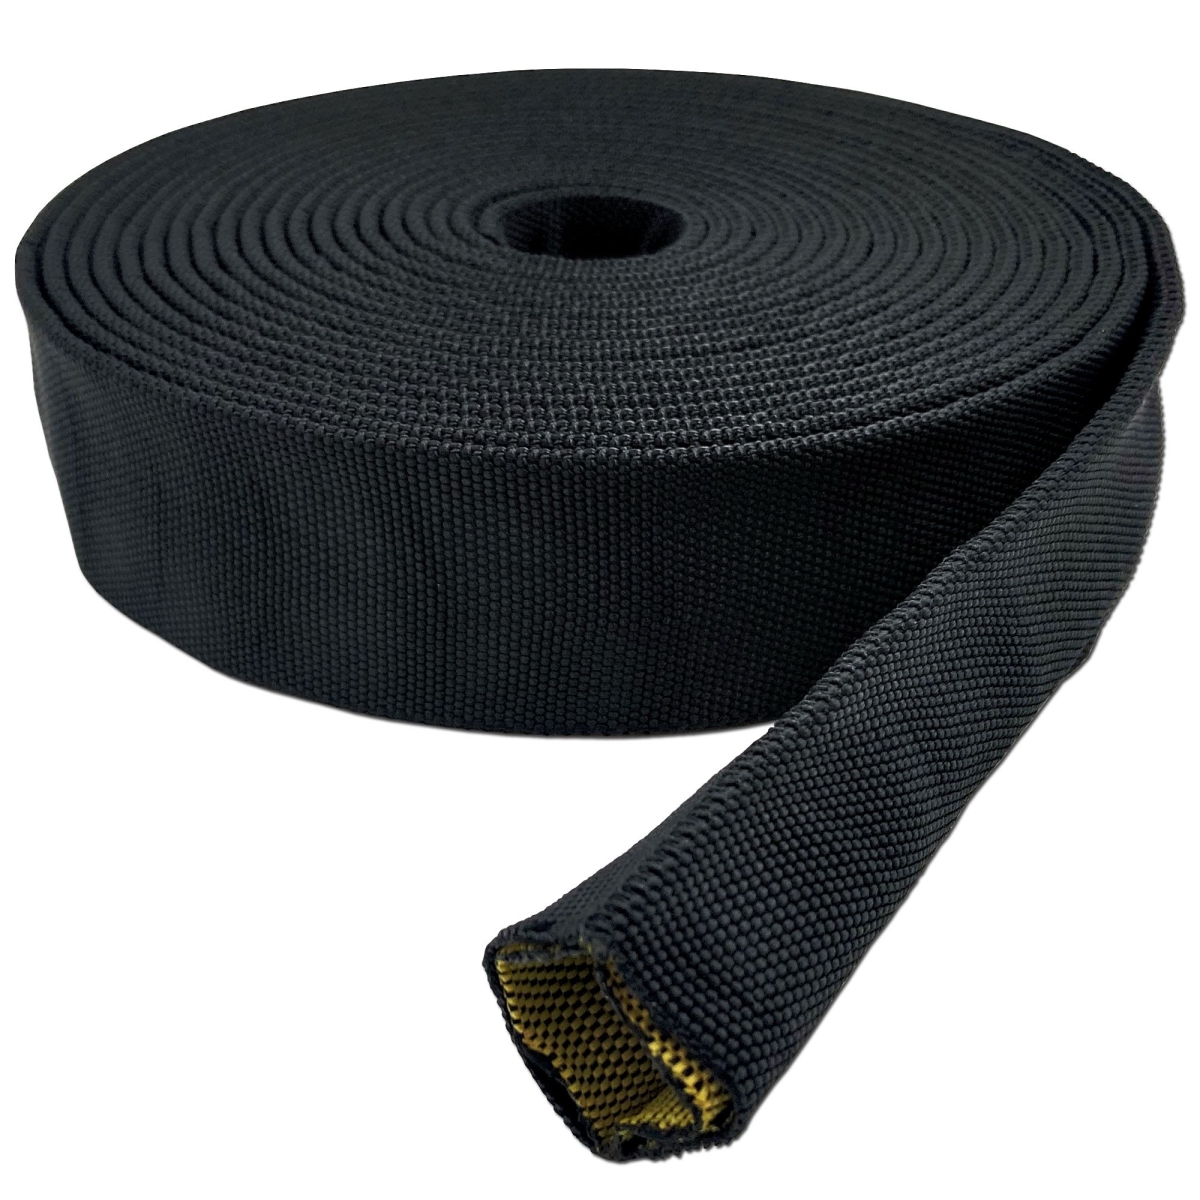 Picture of Electriduct BS-J-BURST-300-25-BK 3 in. x 25 ft. Burst Protection Multifilament Nylon Braided Sleeving - Black